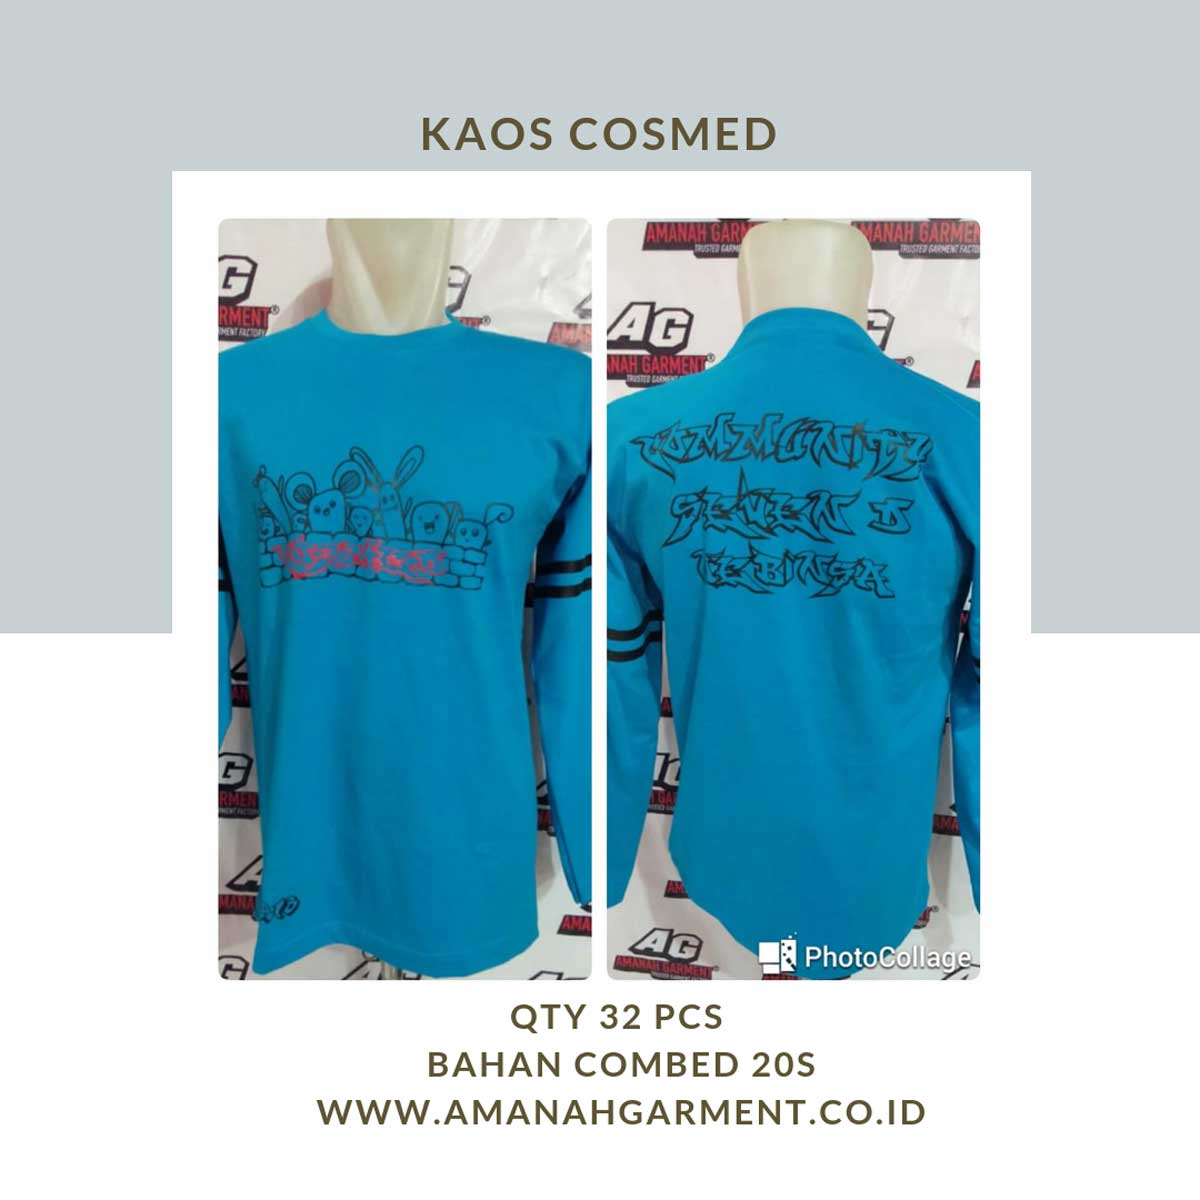 Bikin Kaos Reuni, Harga Kaos Reuni, Harga Kaos Reuni Smp